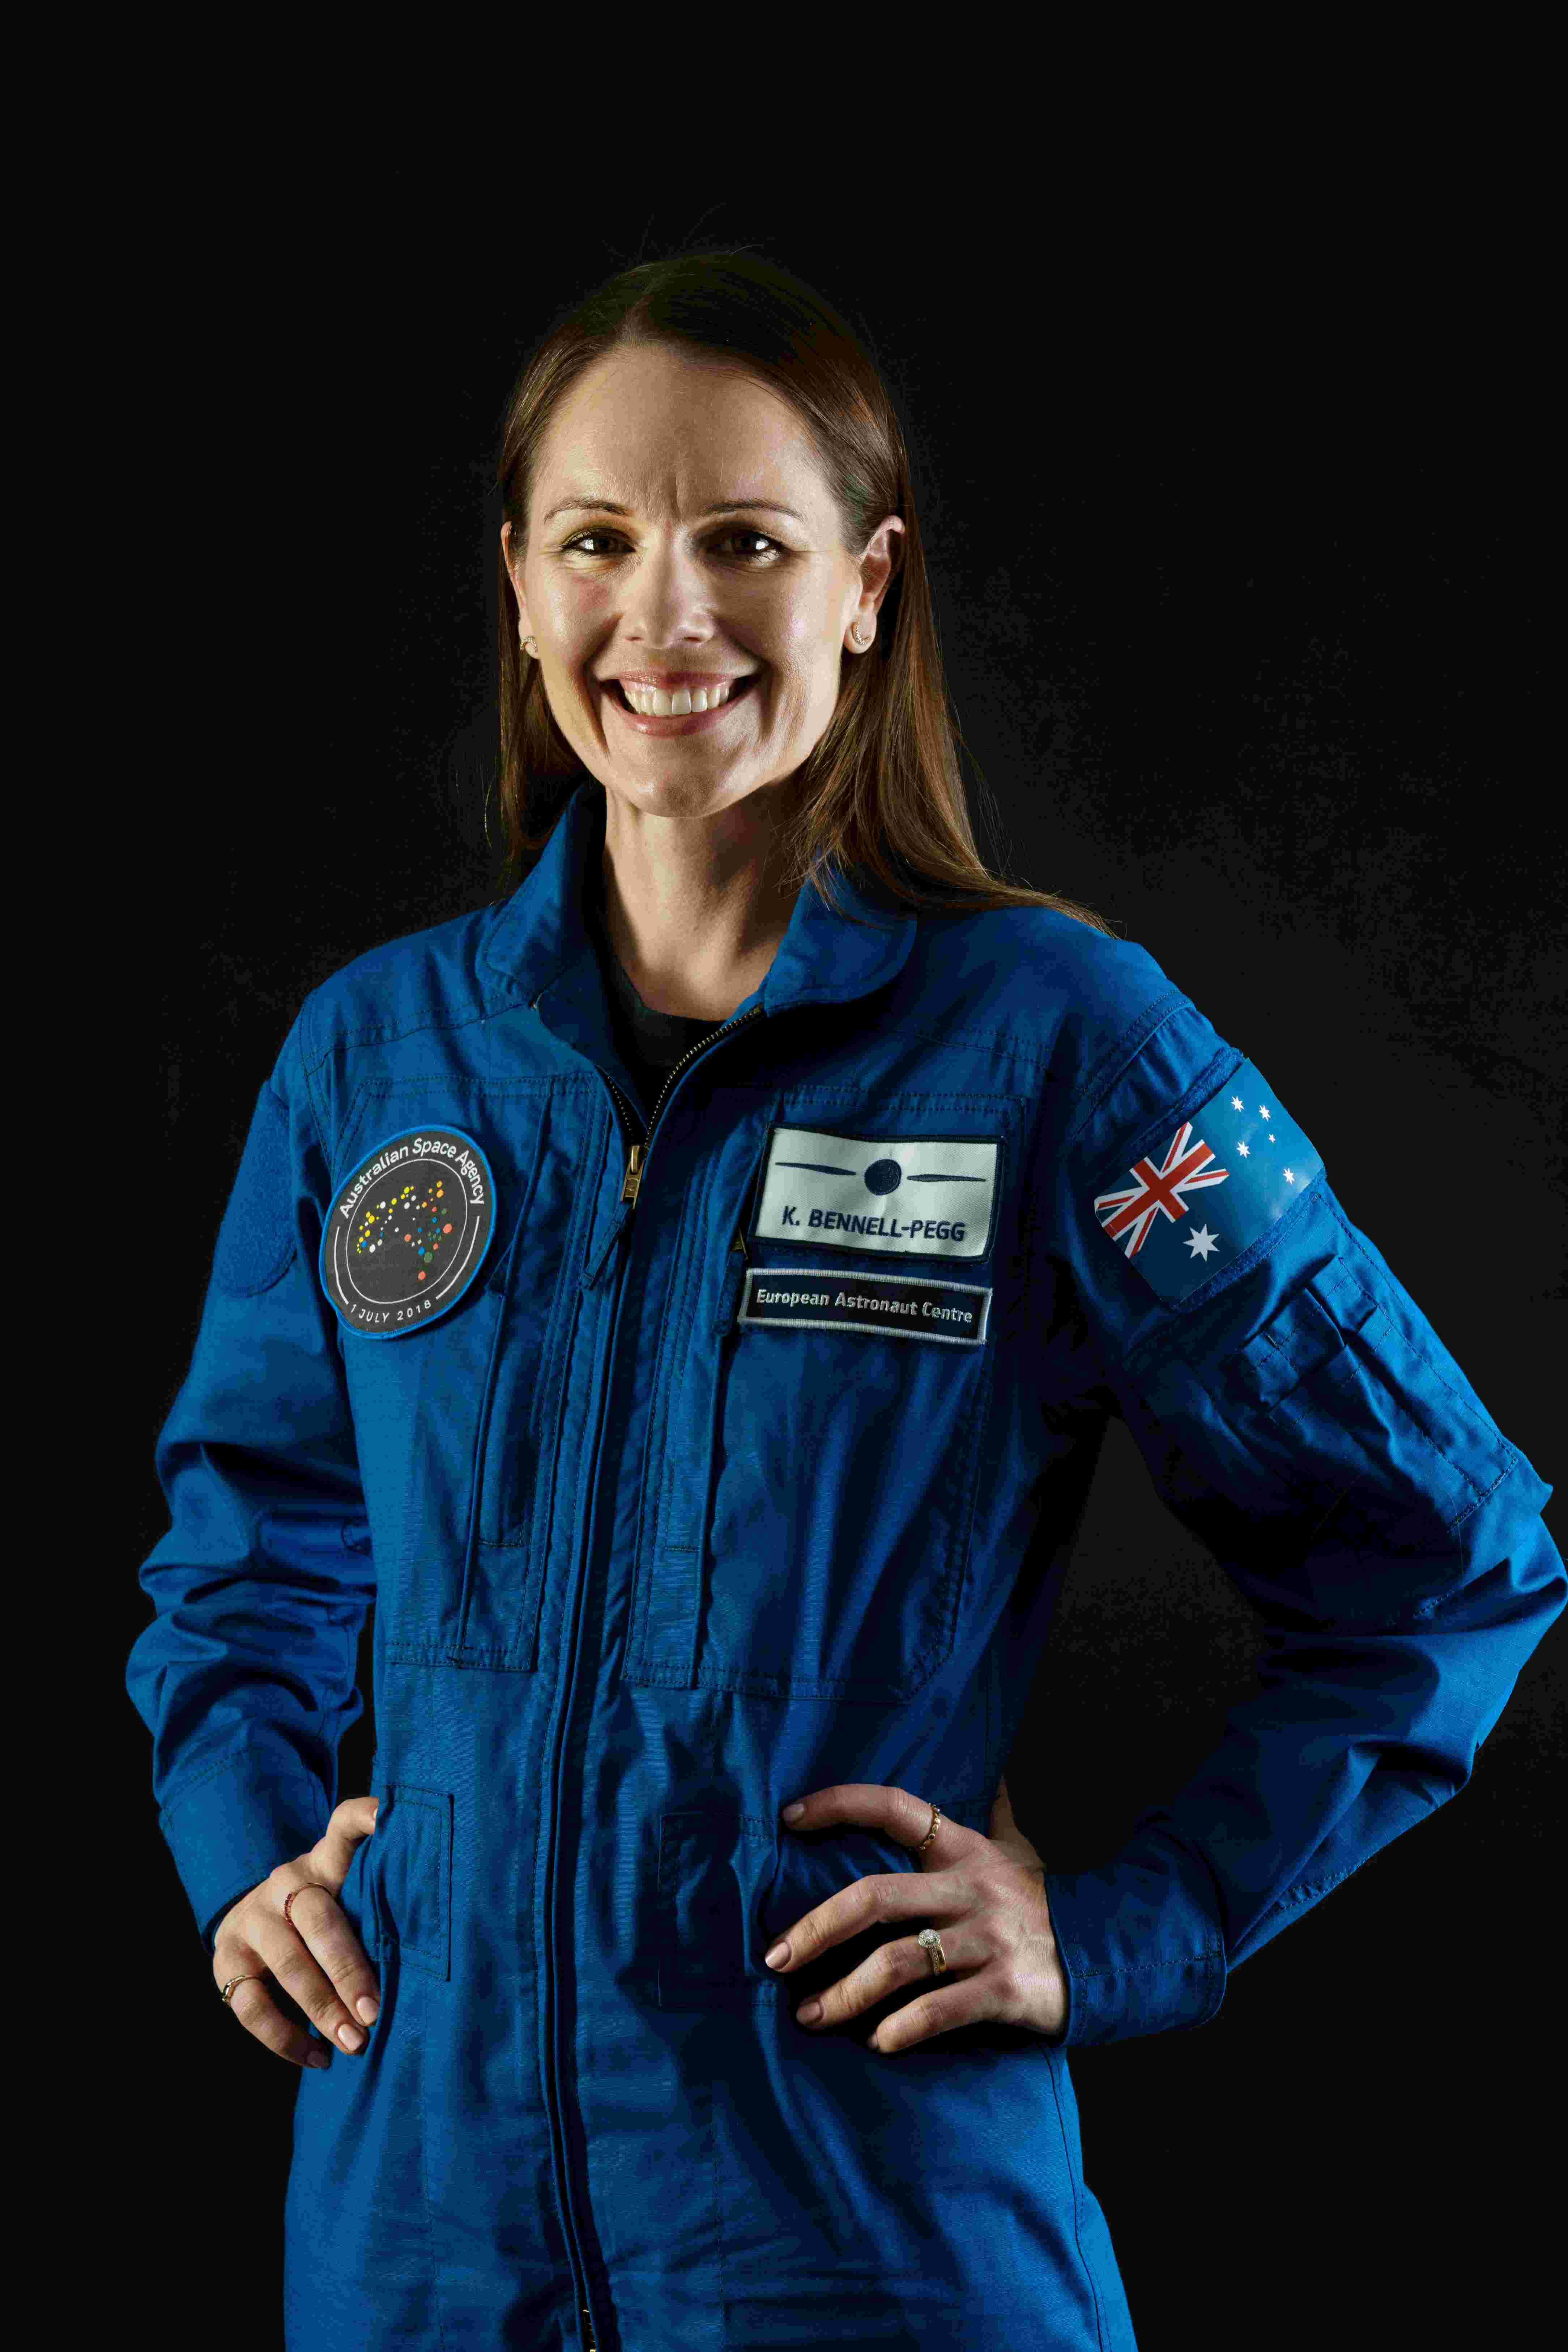 The first qualified astronaut under the Australian flag, Katherine Bennell-Pegg. | Newsreel